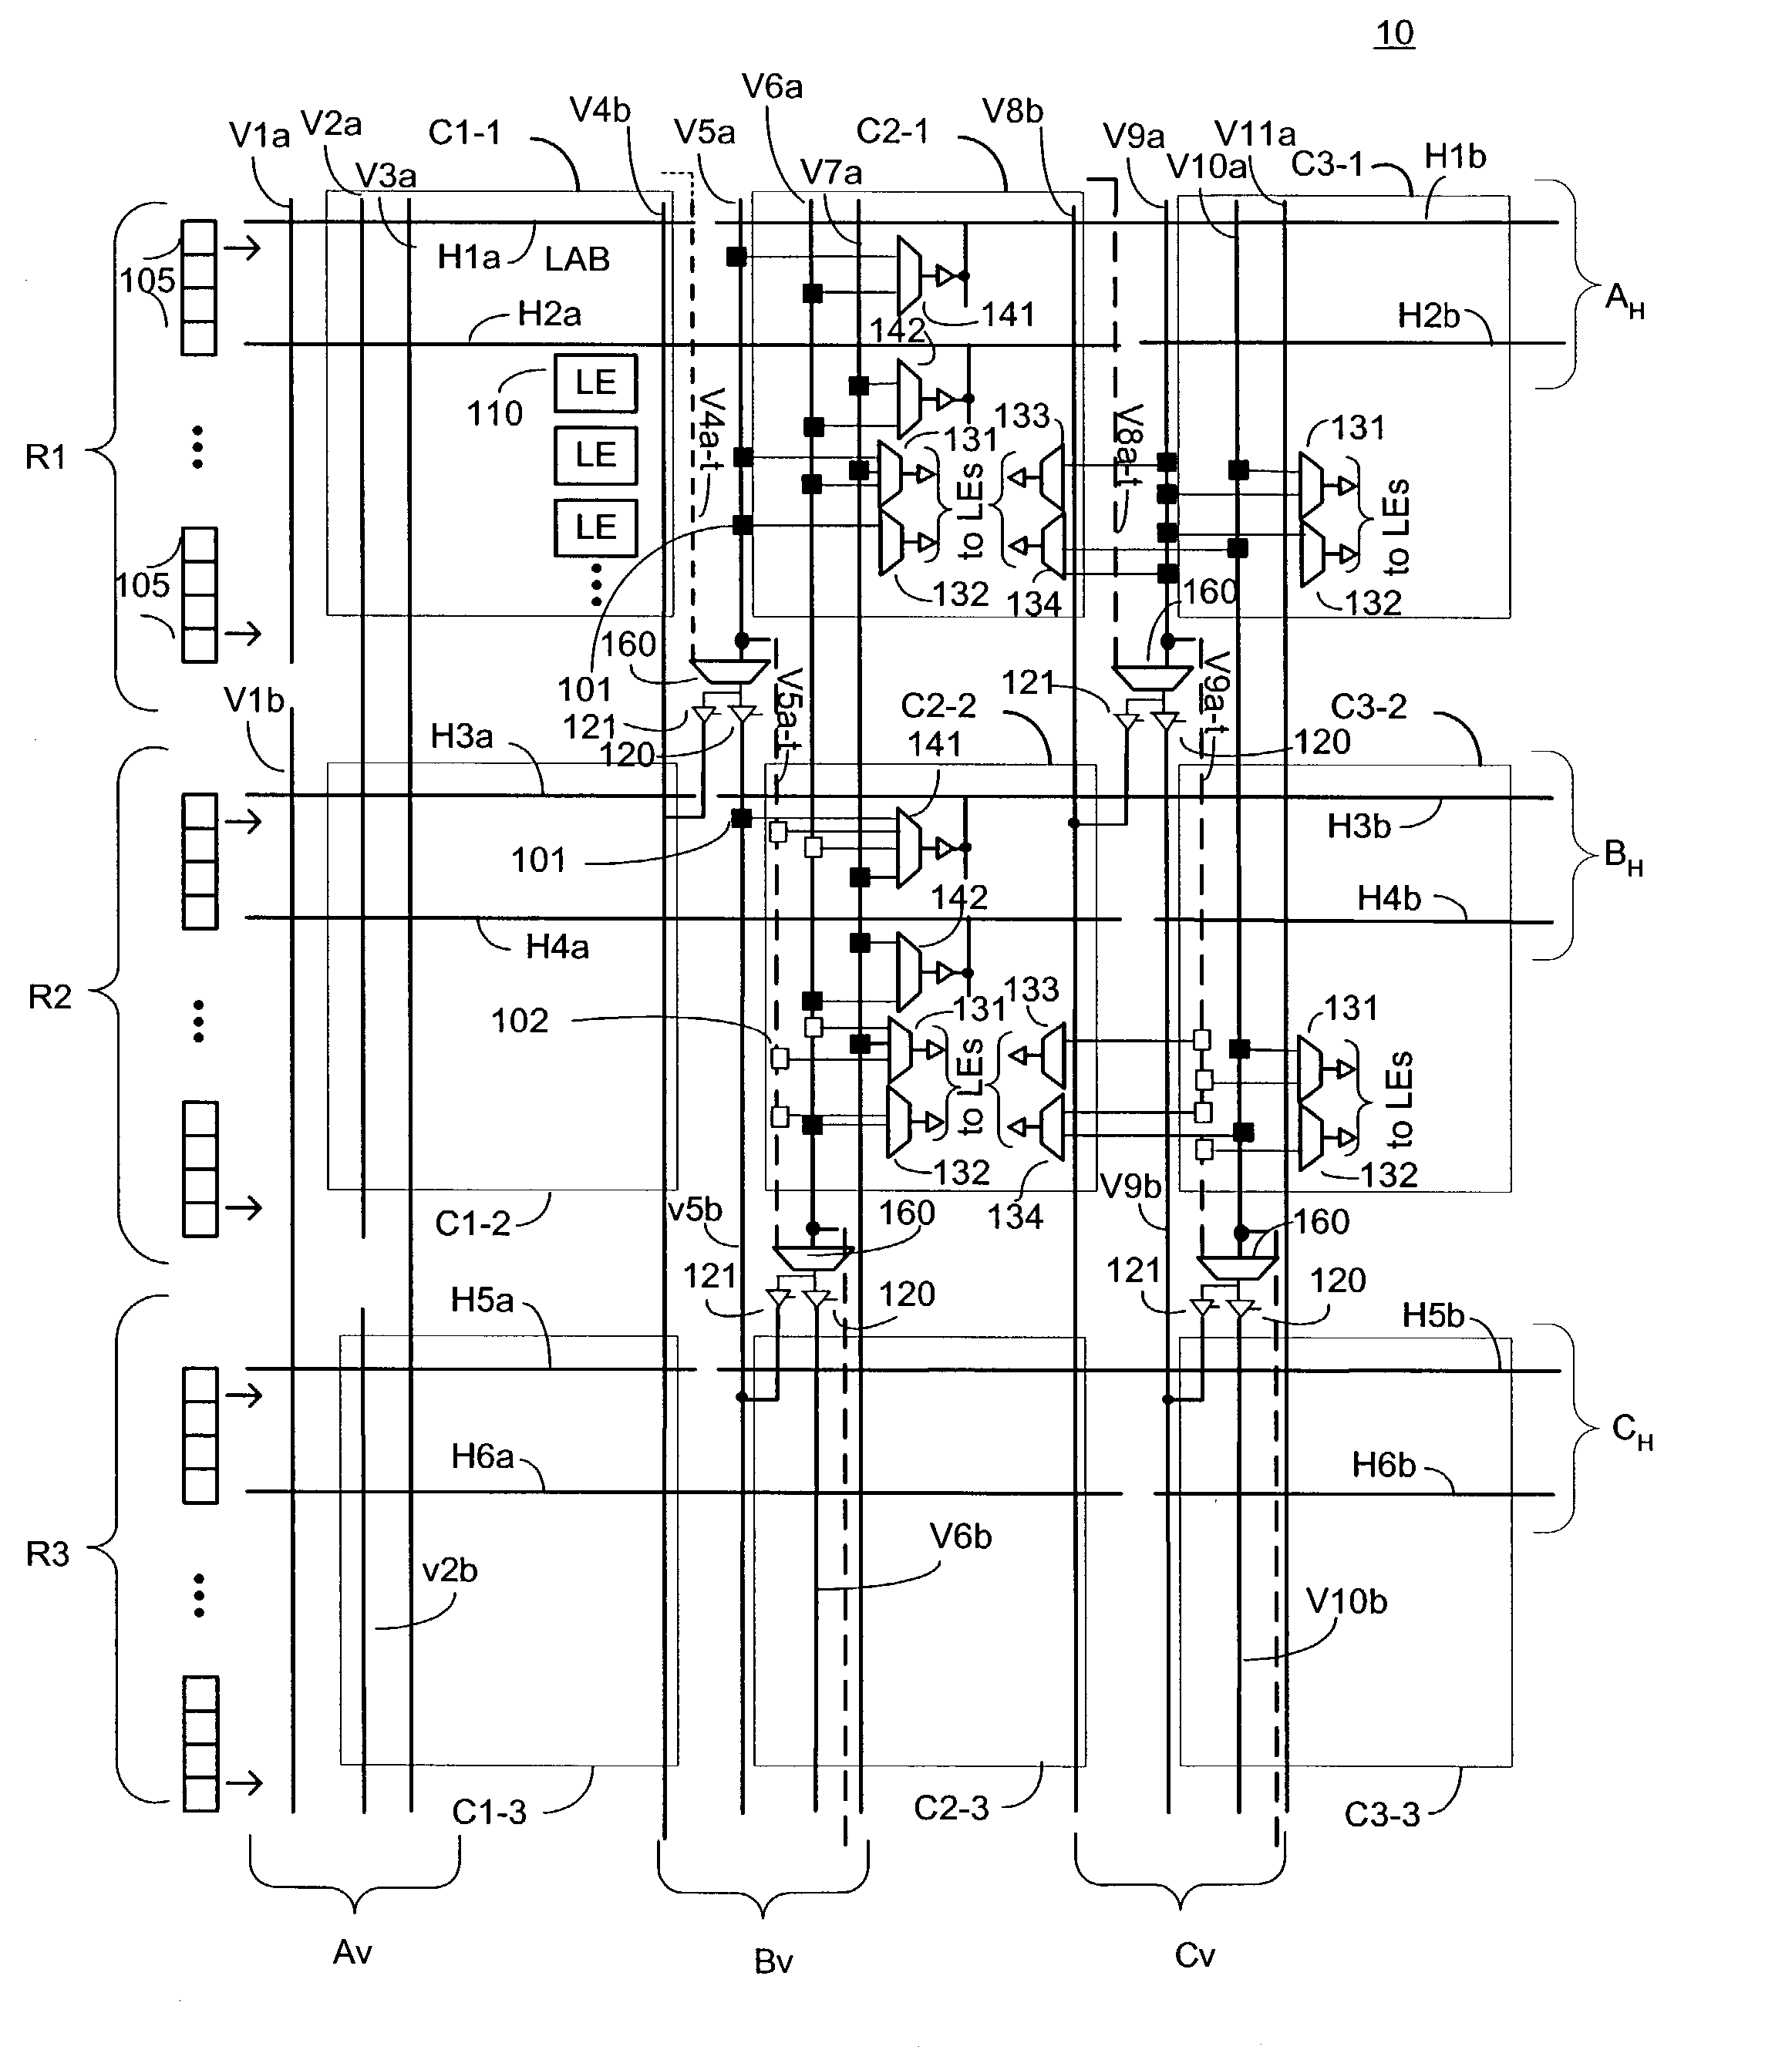 Programmable logic device with redundant circuitry